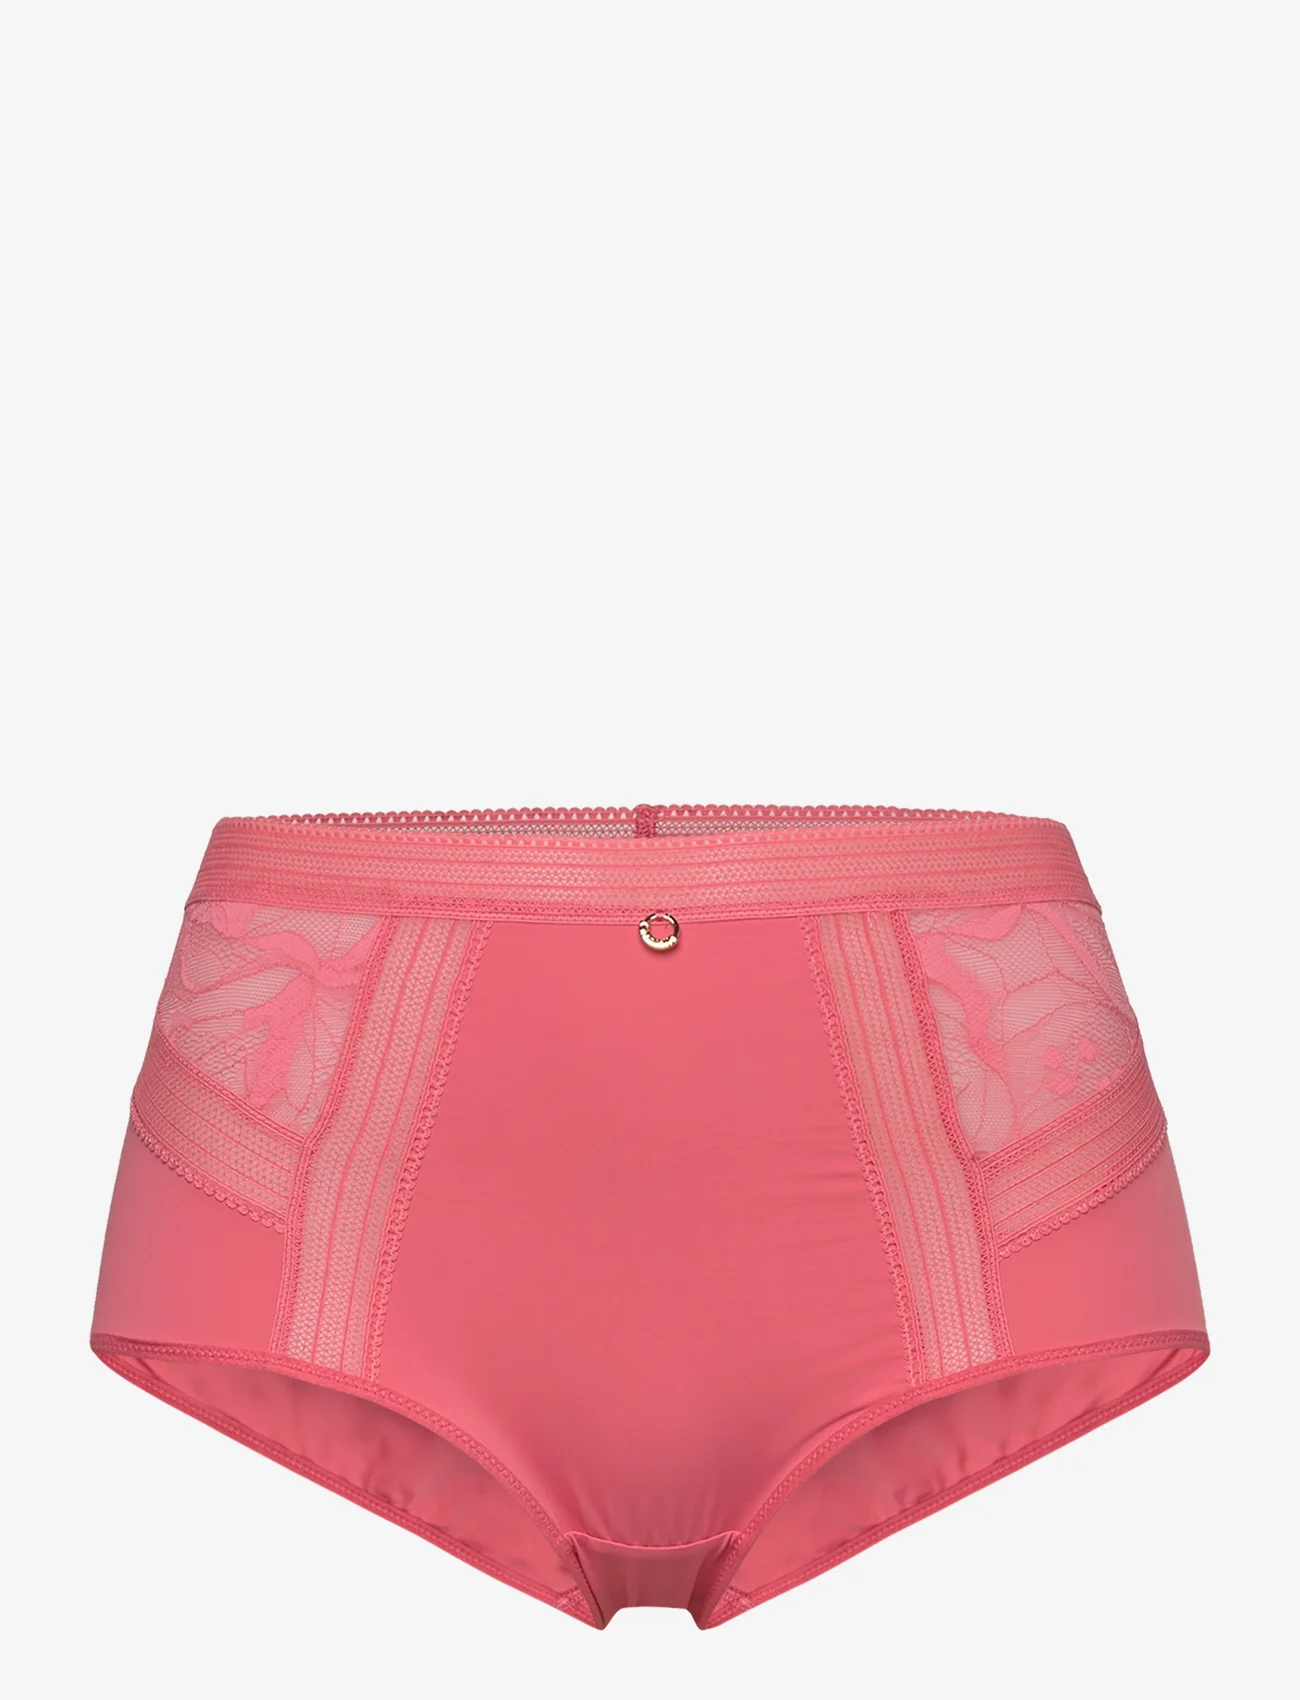 Chantelle Beach - True lace High-waisted full brief - apakšbikses - pink rose - 0